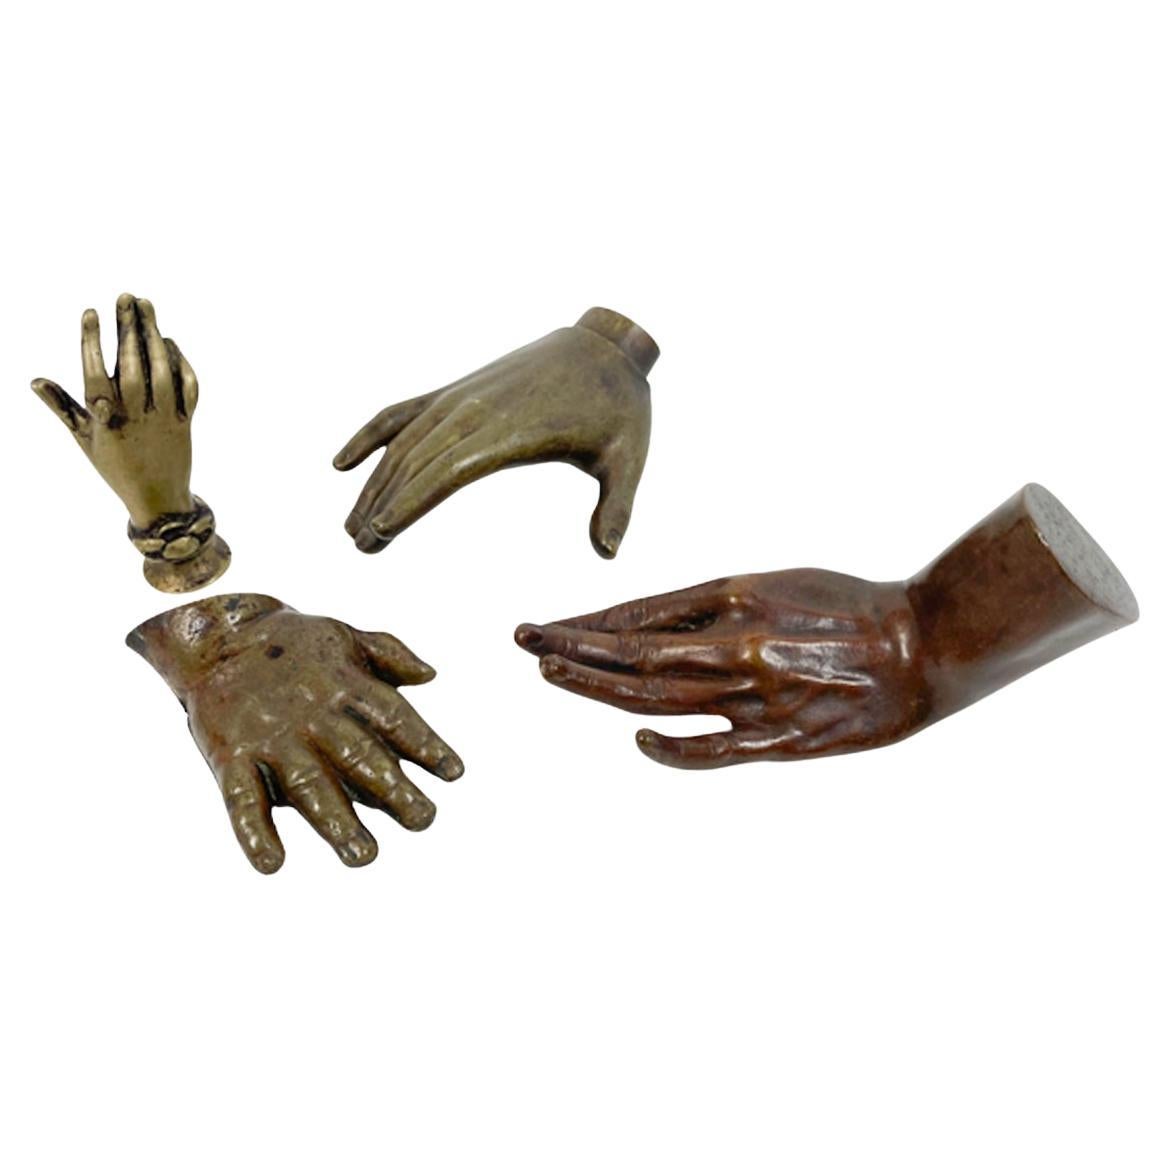 Group of 4 19th/20th Century Models of Hands in Cast Bronze and Brass